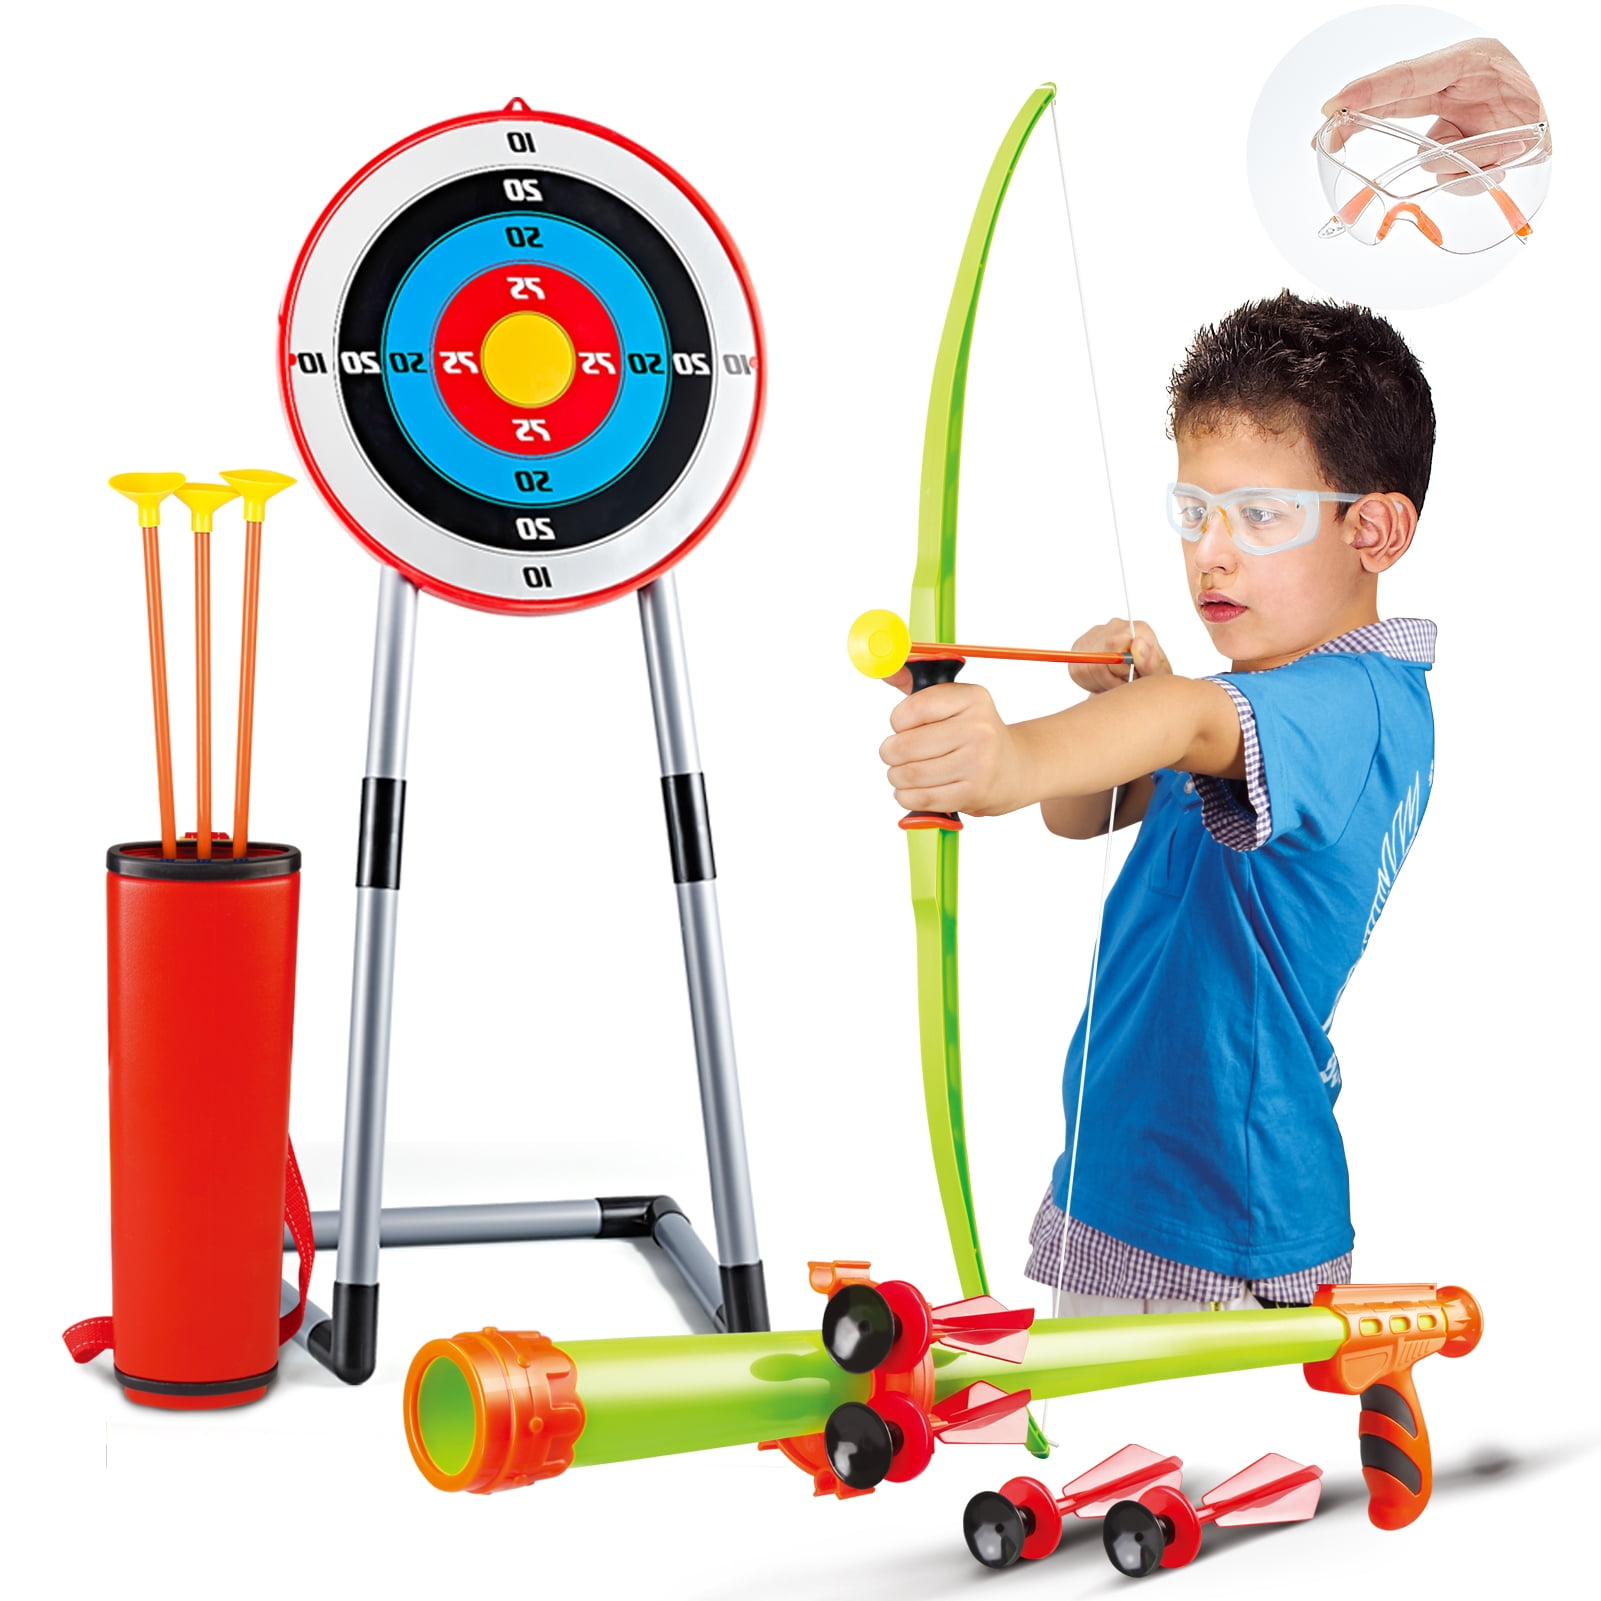 Cross Bow & Arrow Archery Set With Target Kids Toy Outdoor Garden Fun Game Gift 